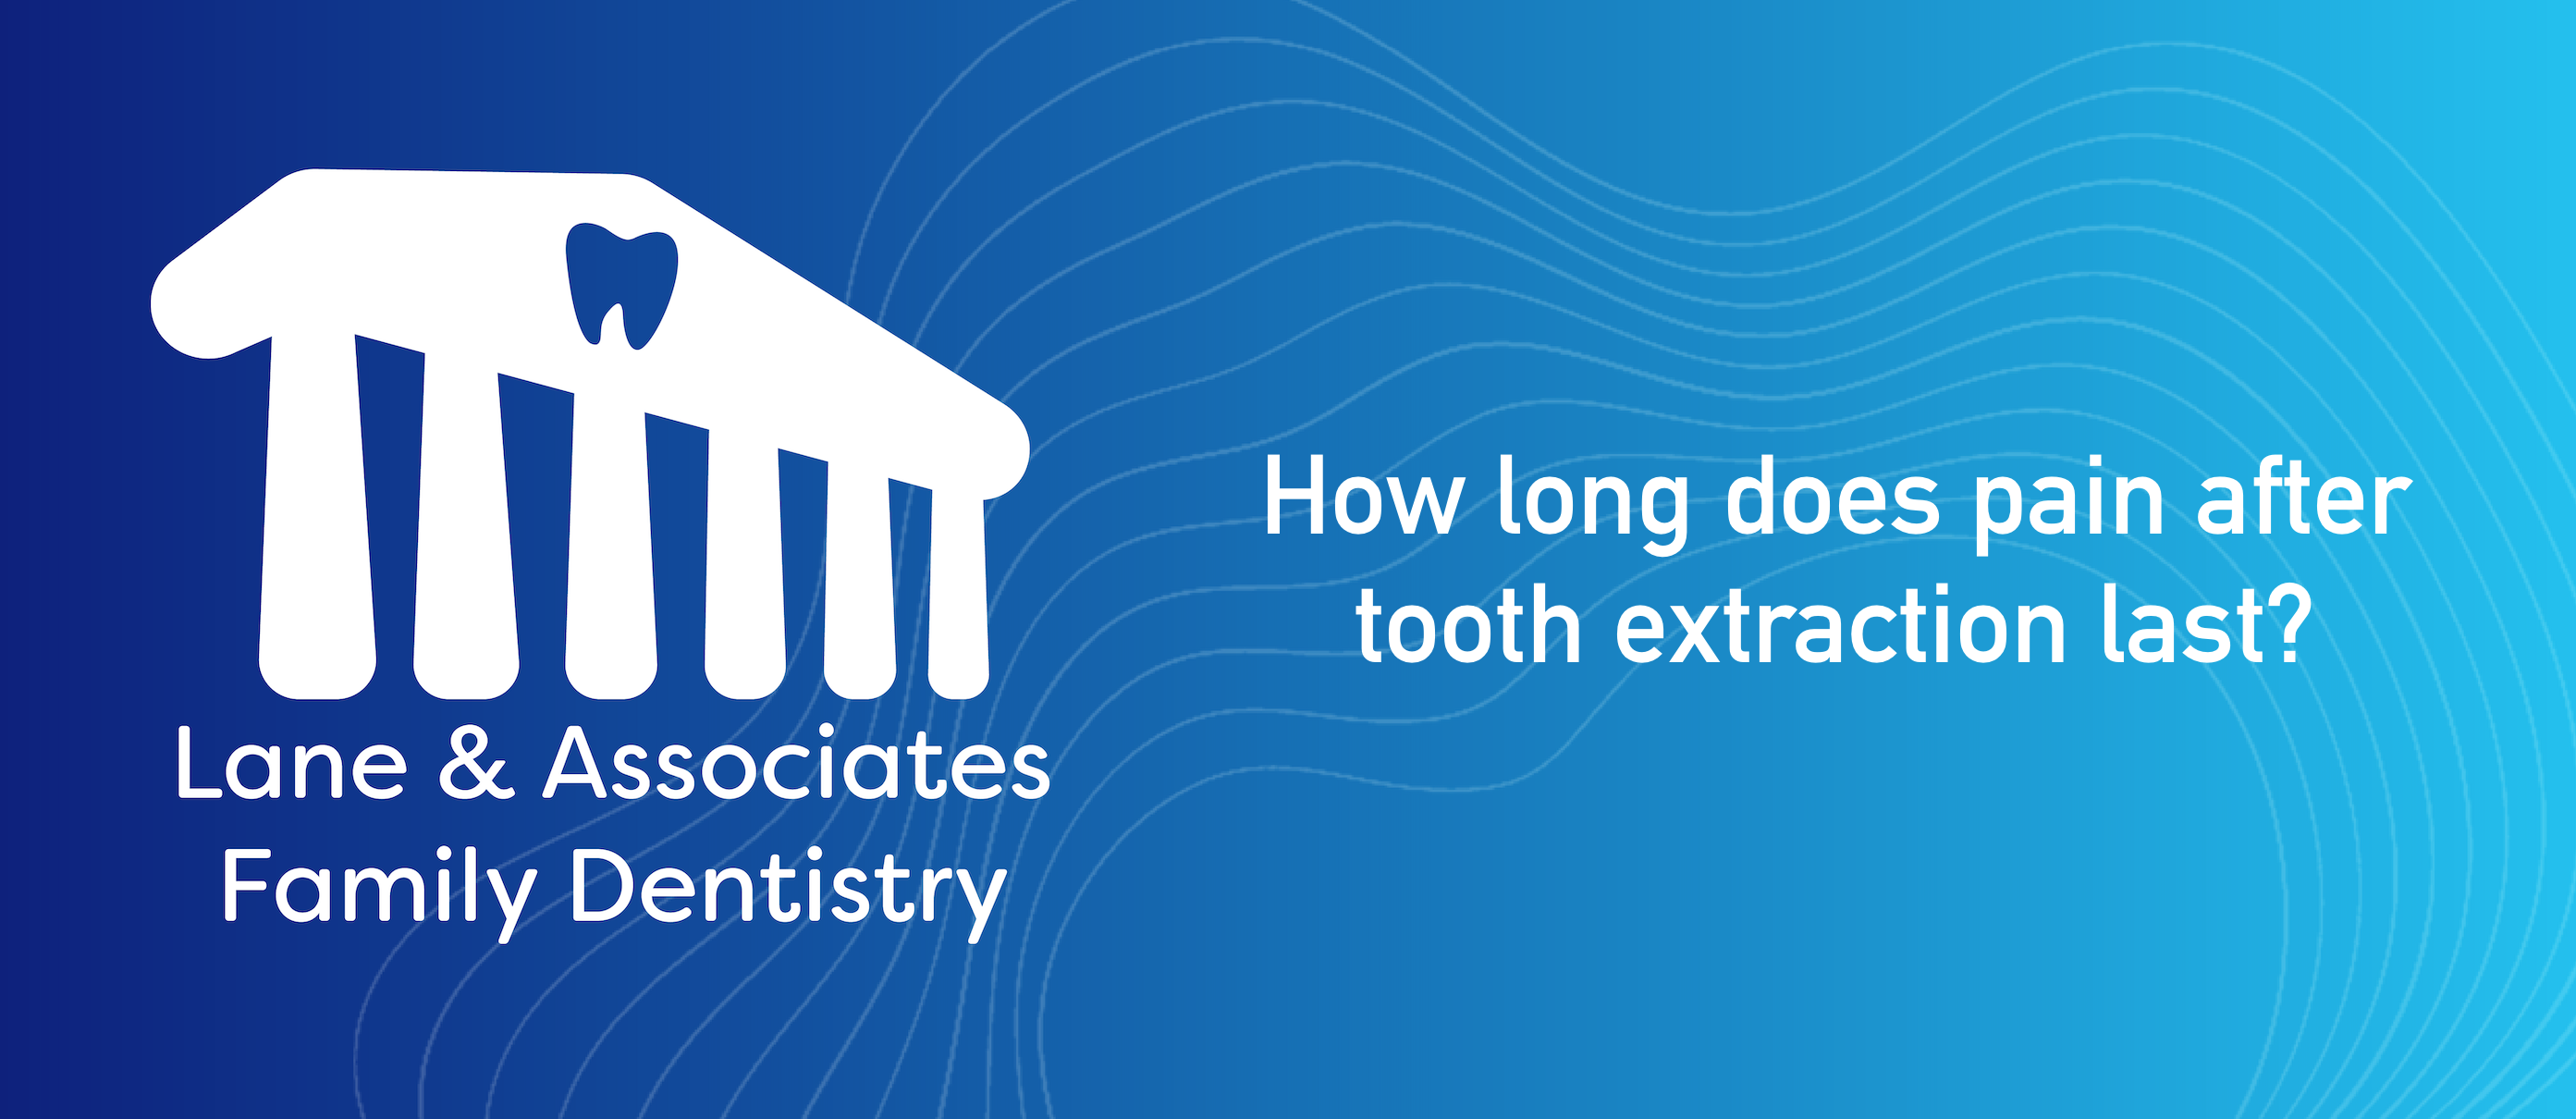 How long does pain after tooth extraction last?